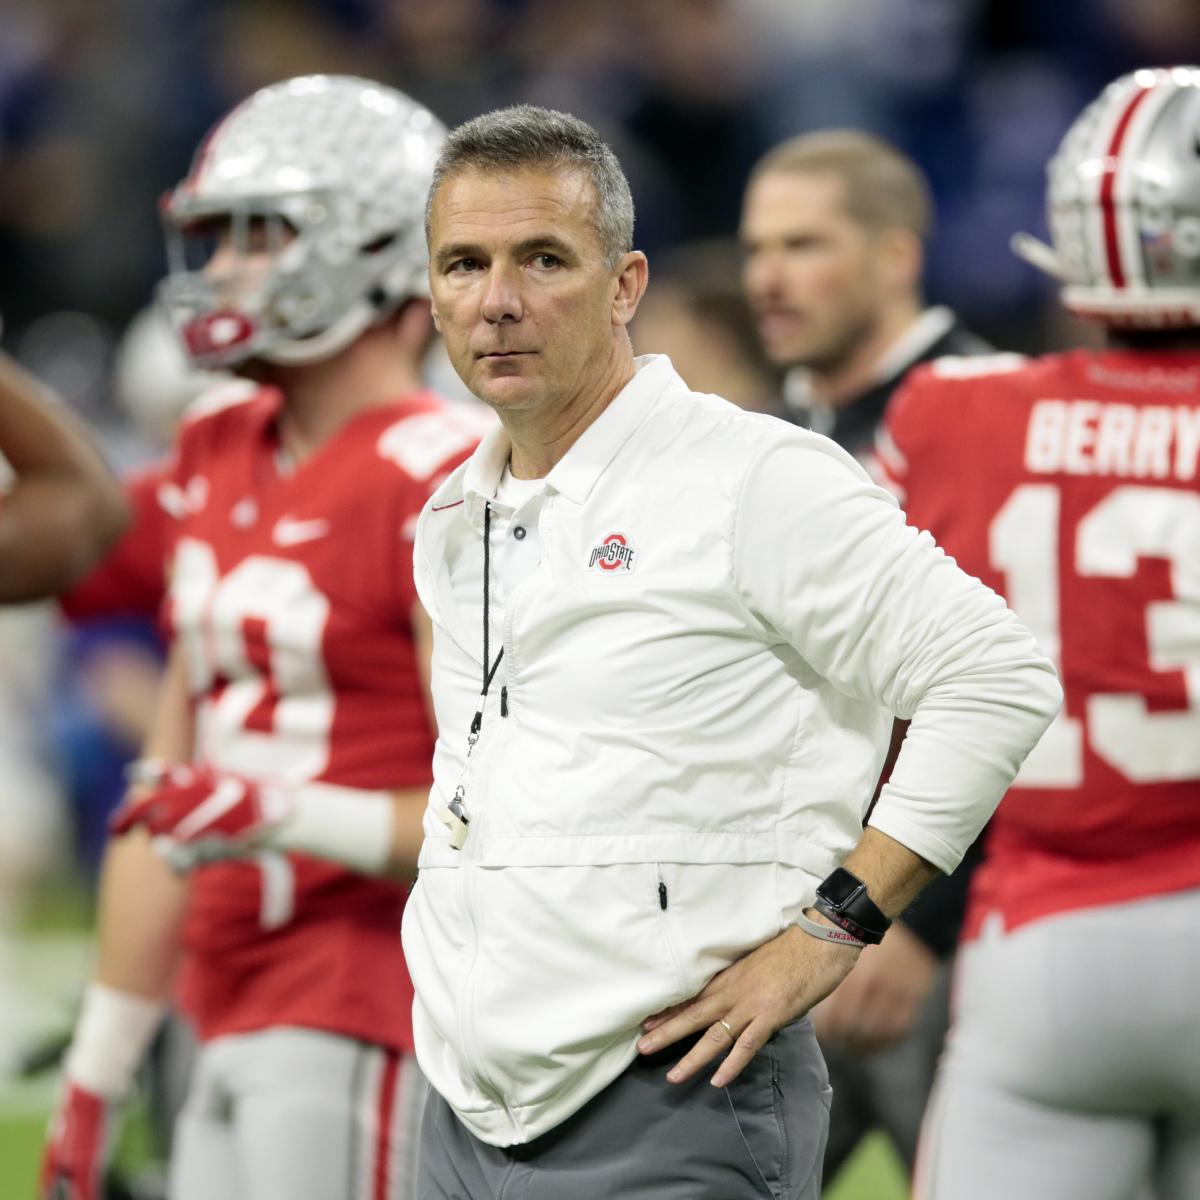 Urban Meyer Says 'We'll See' When Asked If He'd Be Open to Coaching ...